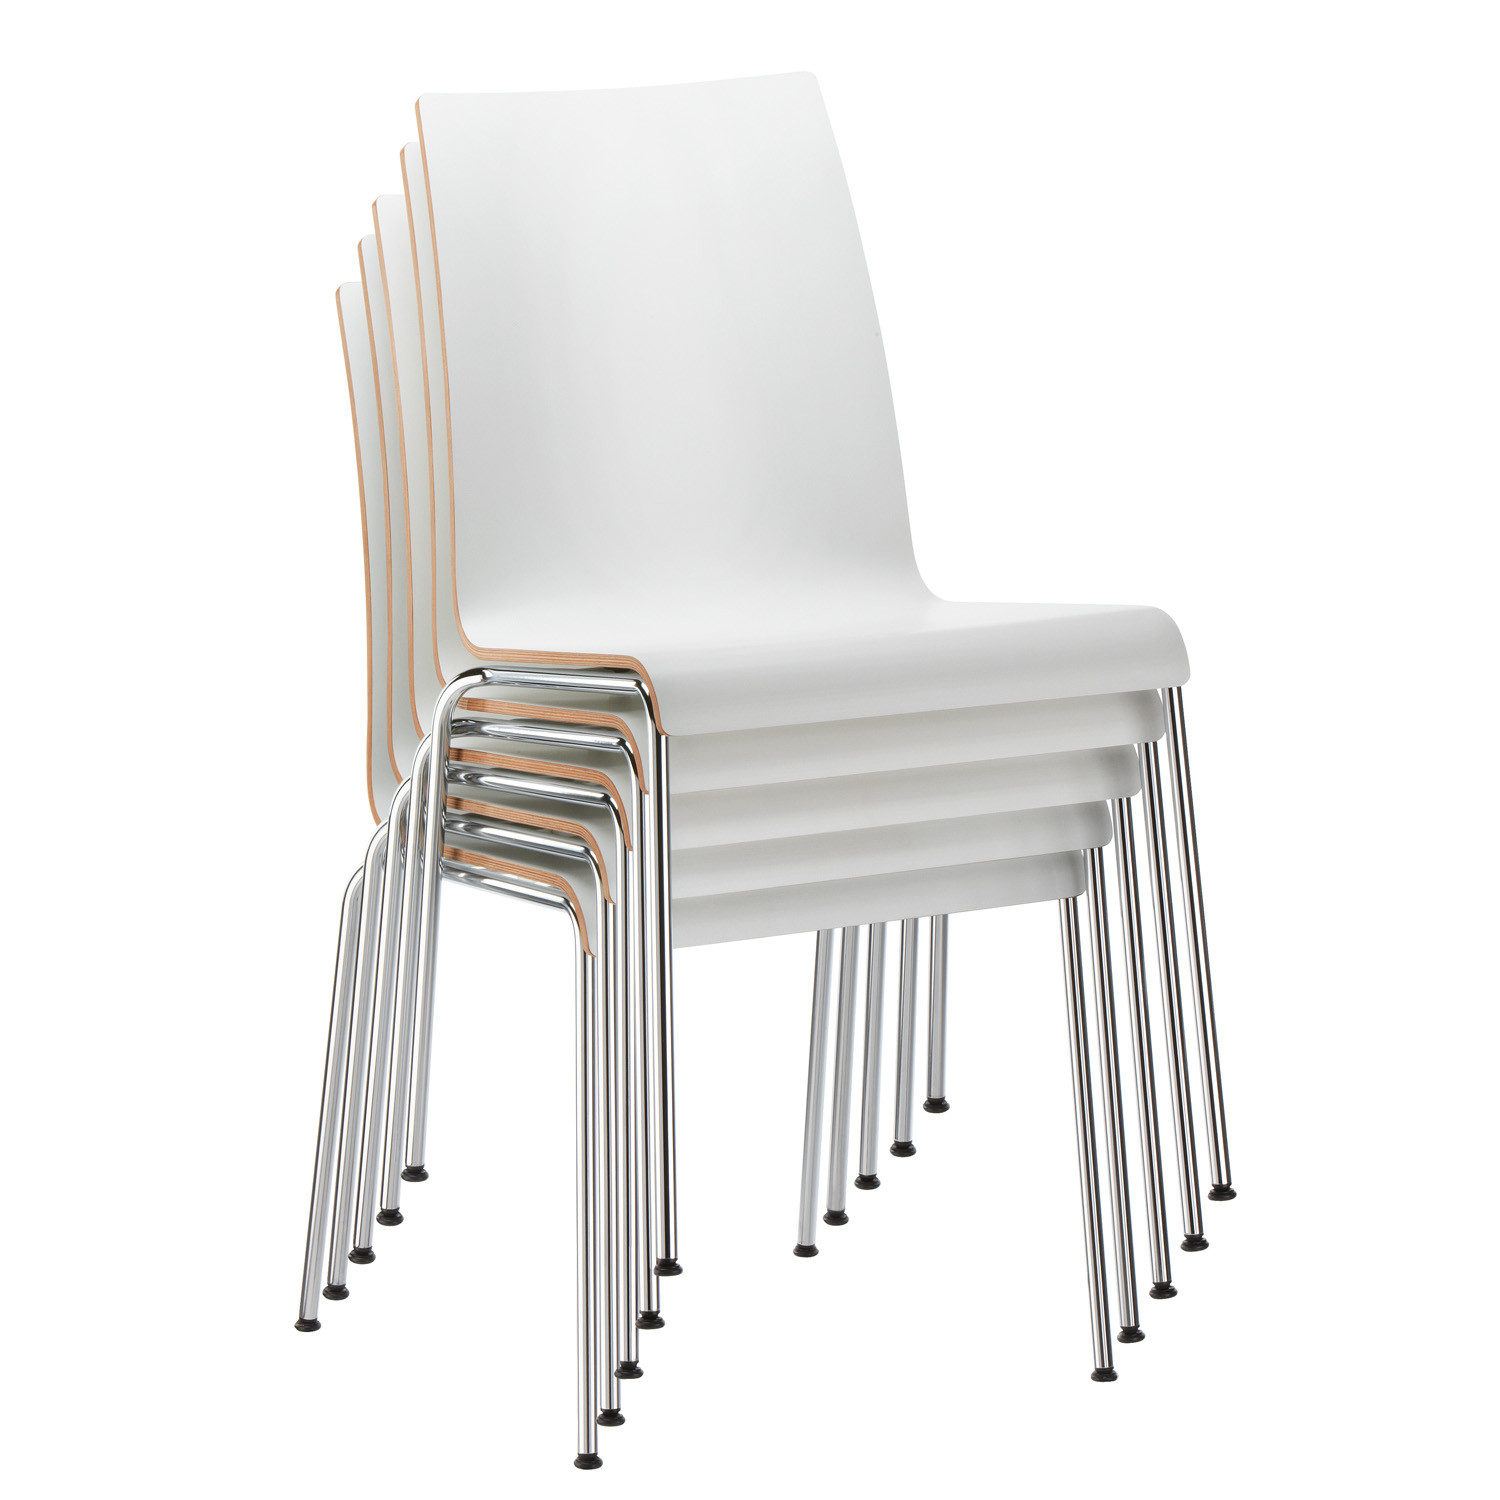 Prime Stacking Chairs